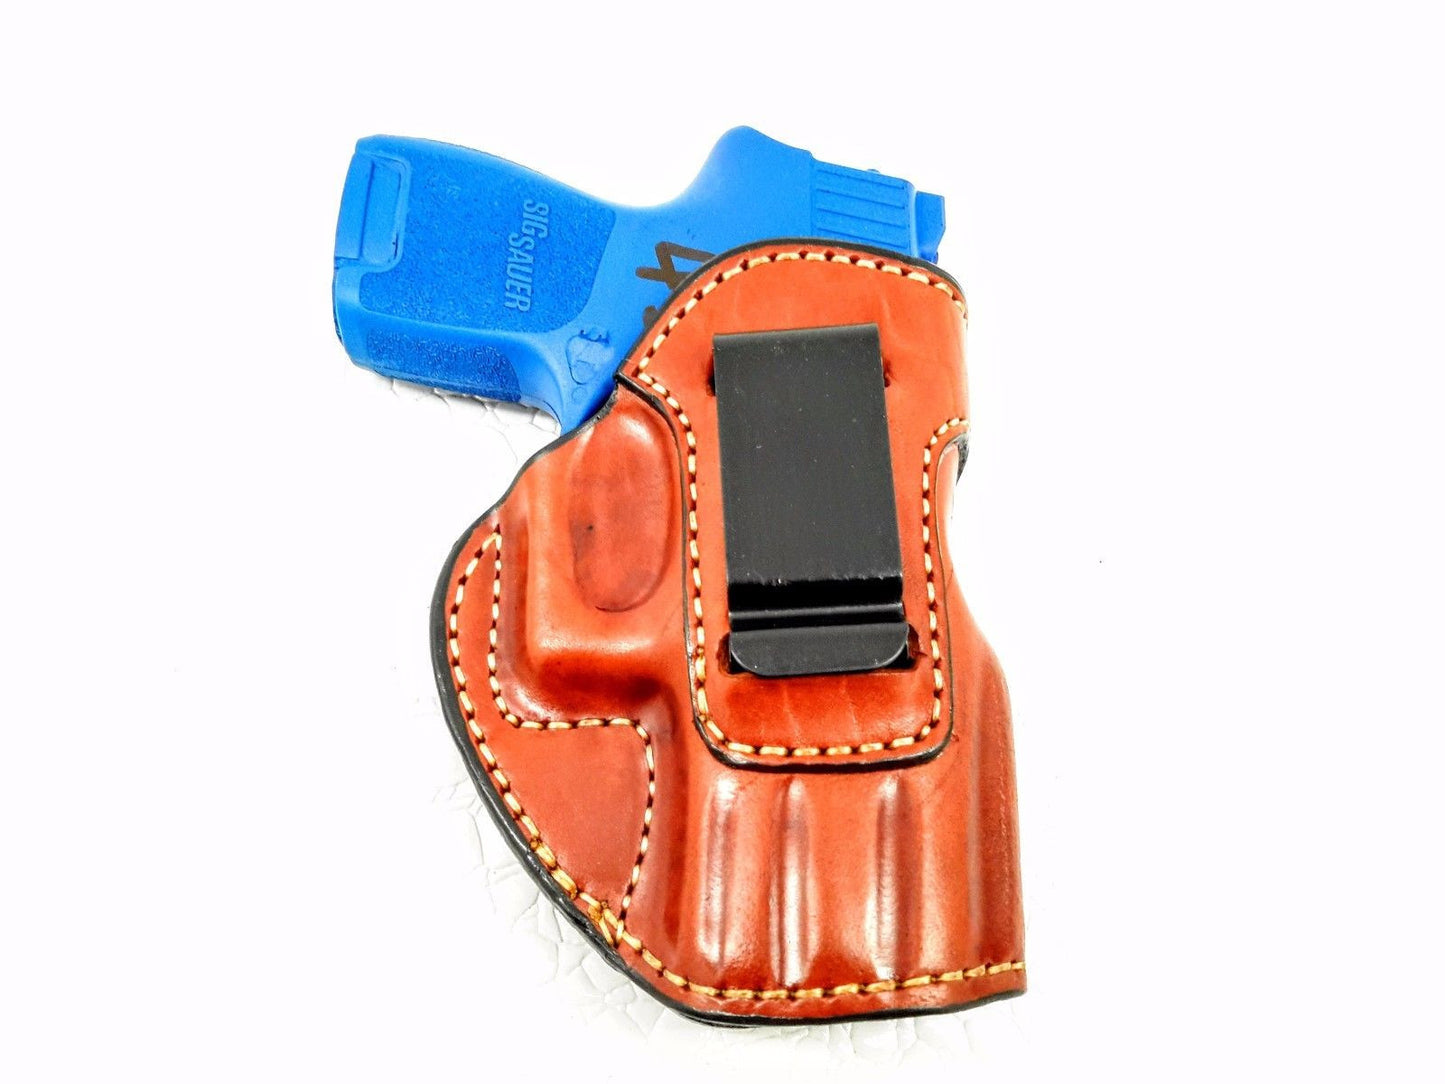 IWB Inside the Waistband holster  for SIG Sauer P250 Compact , MyHolster